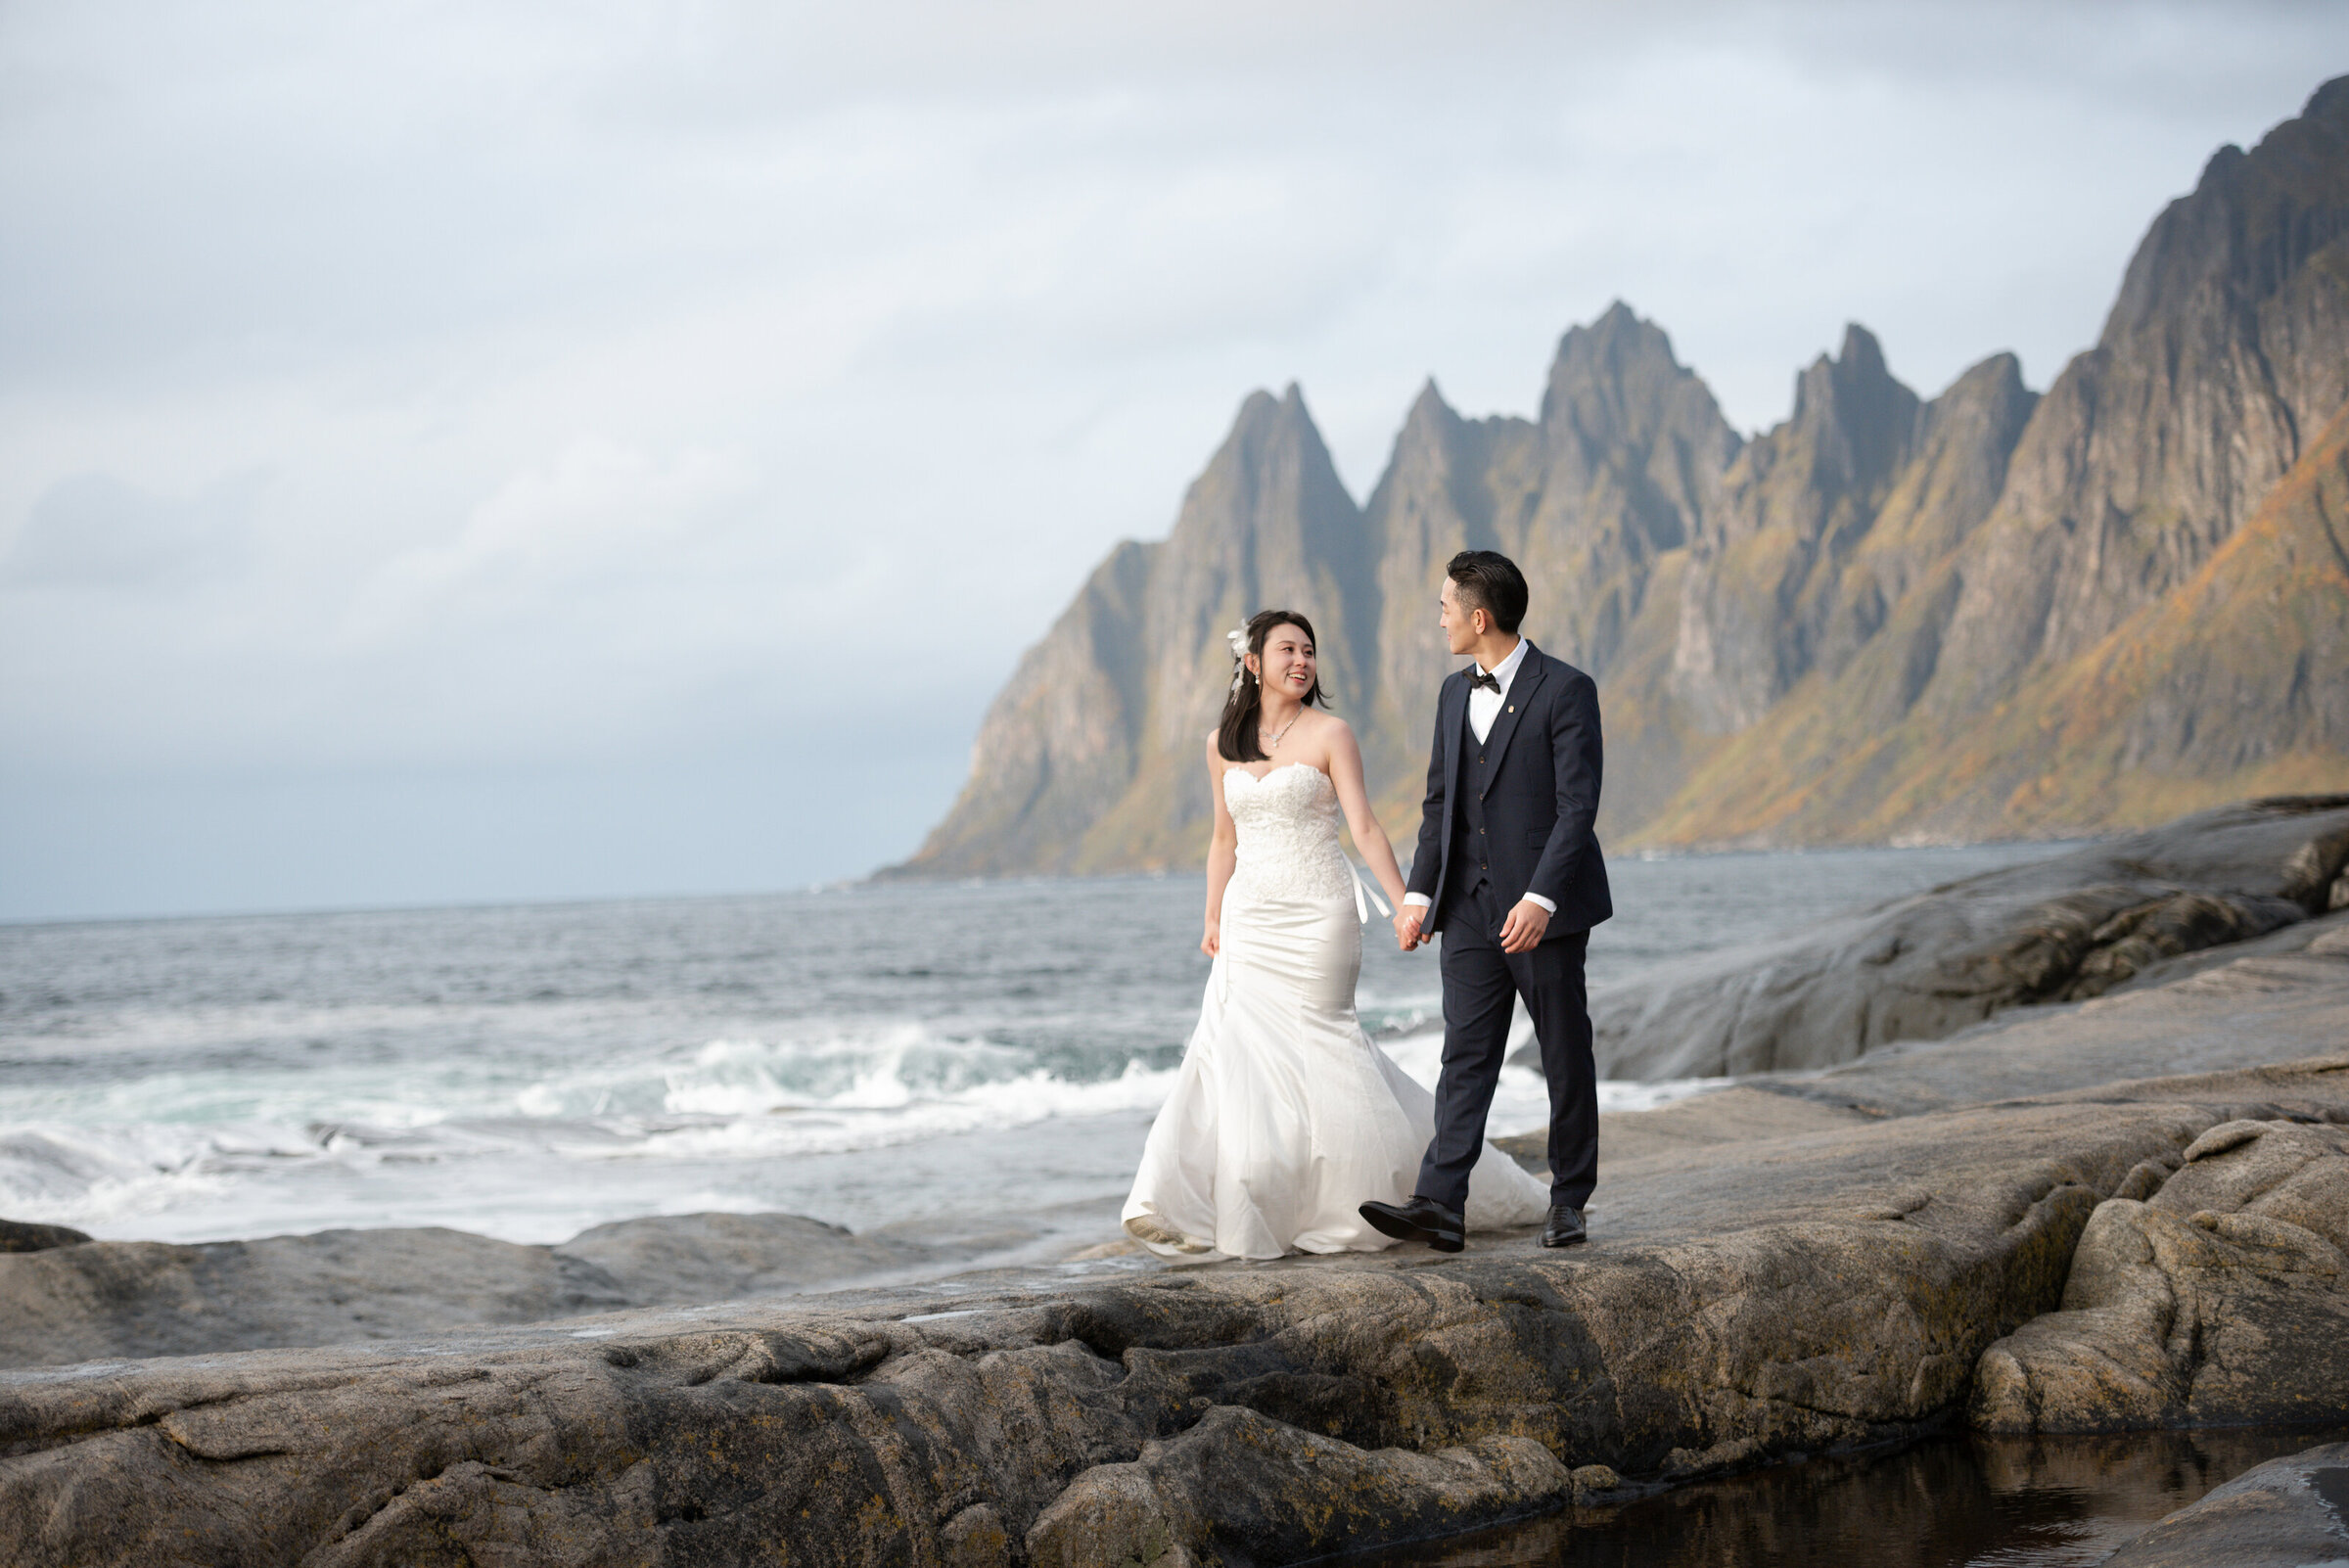 A newlywed couple holding hands and walking on the rocky shores of Senja, Norway, with towering, jagged mountains in the background and dramatic clouds above, celebrating their elopement in this rugged landscape.